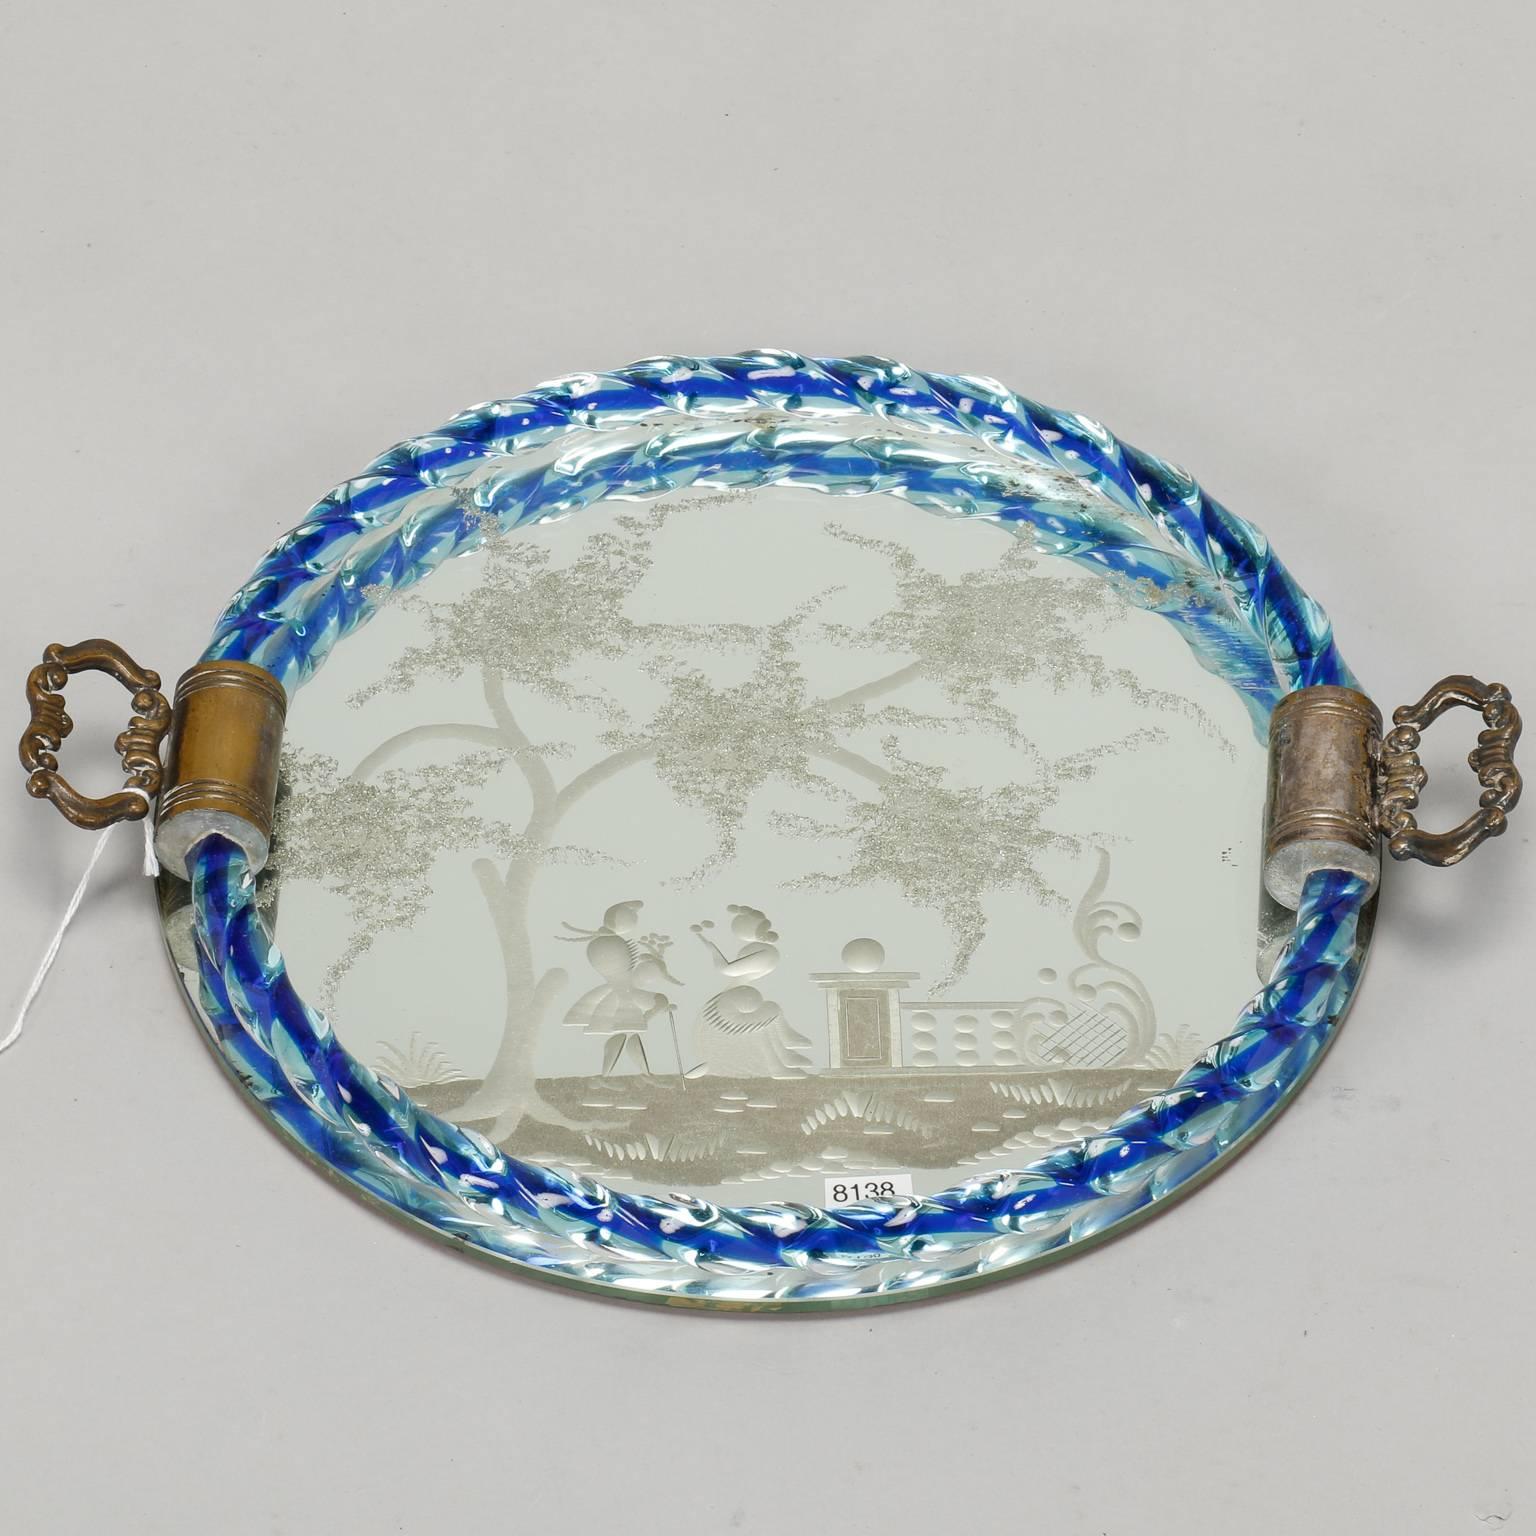 Round Venetian mirrored dresser tray with cast brass handles, blue twisted glass rim and an etched Provincial scene, circa 1940s. Excellent vintage condition.
  